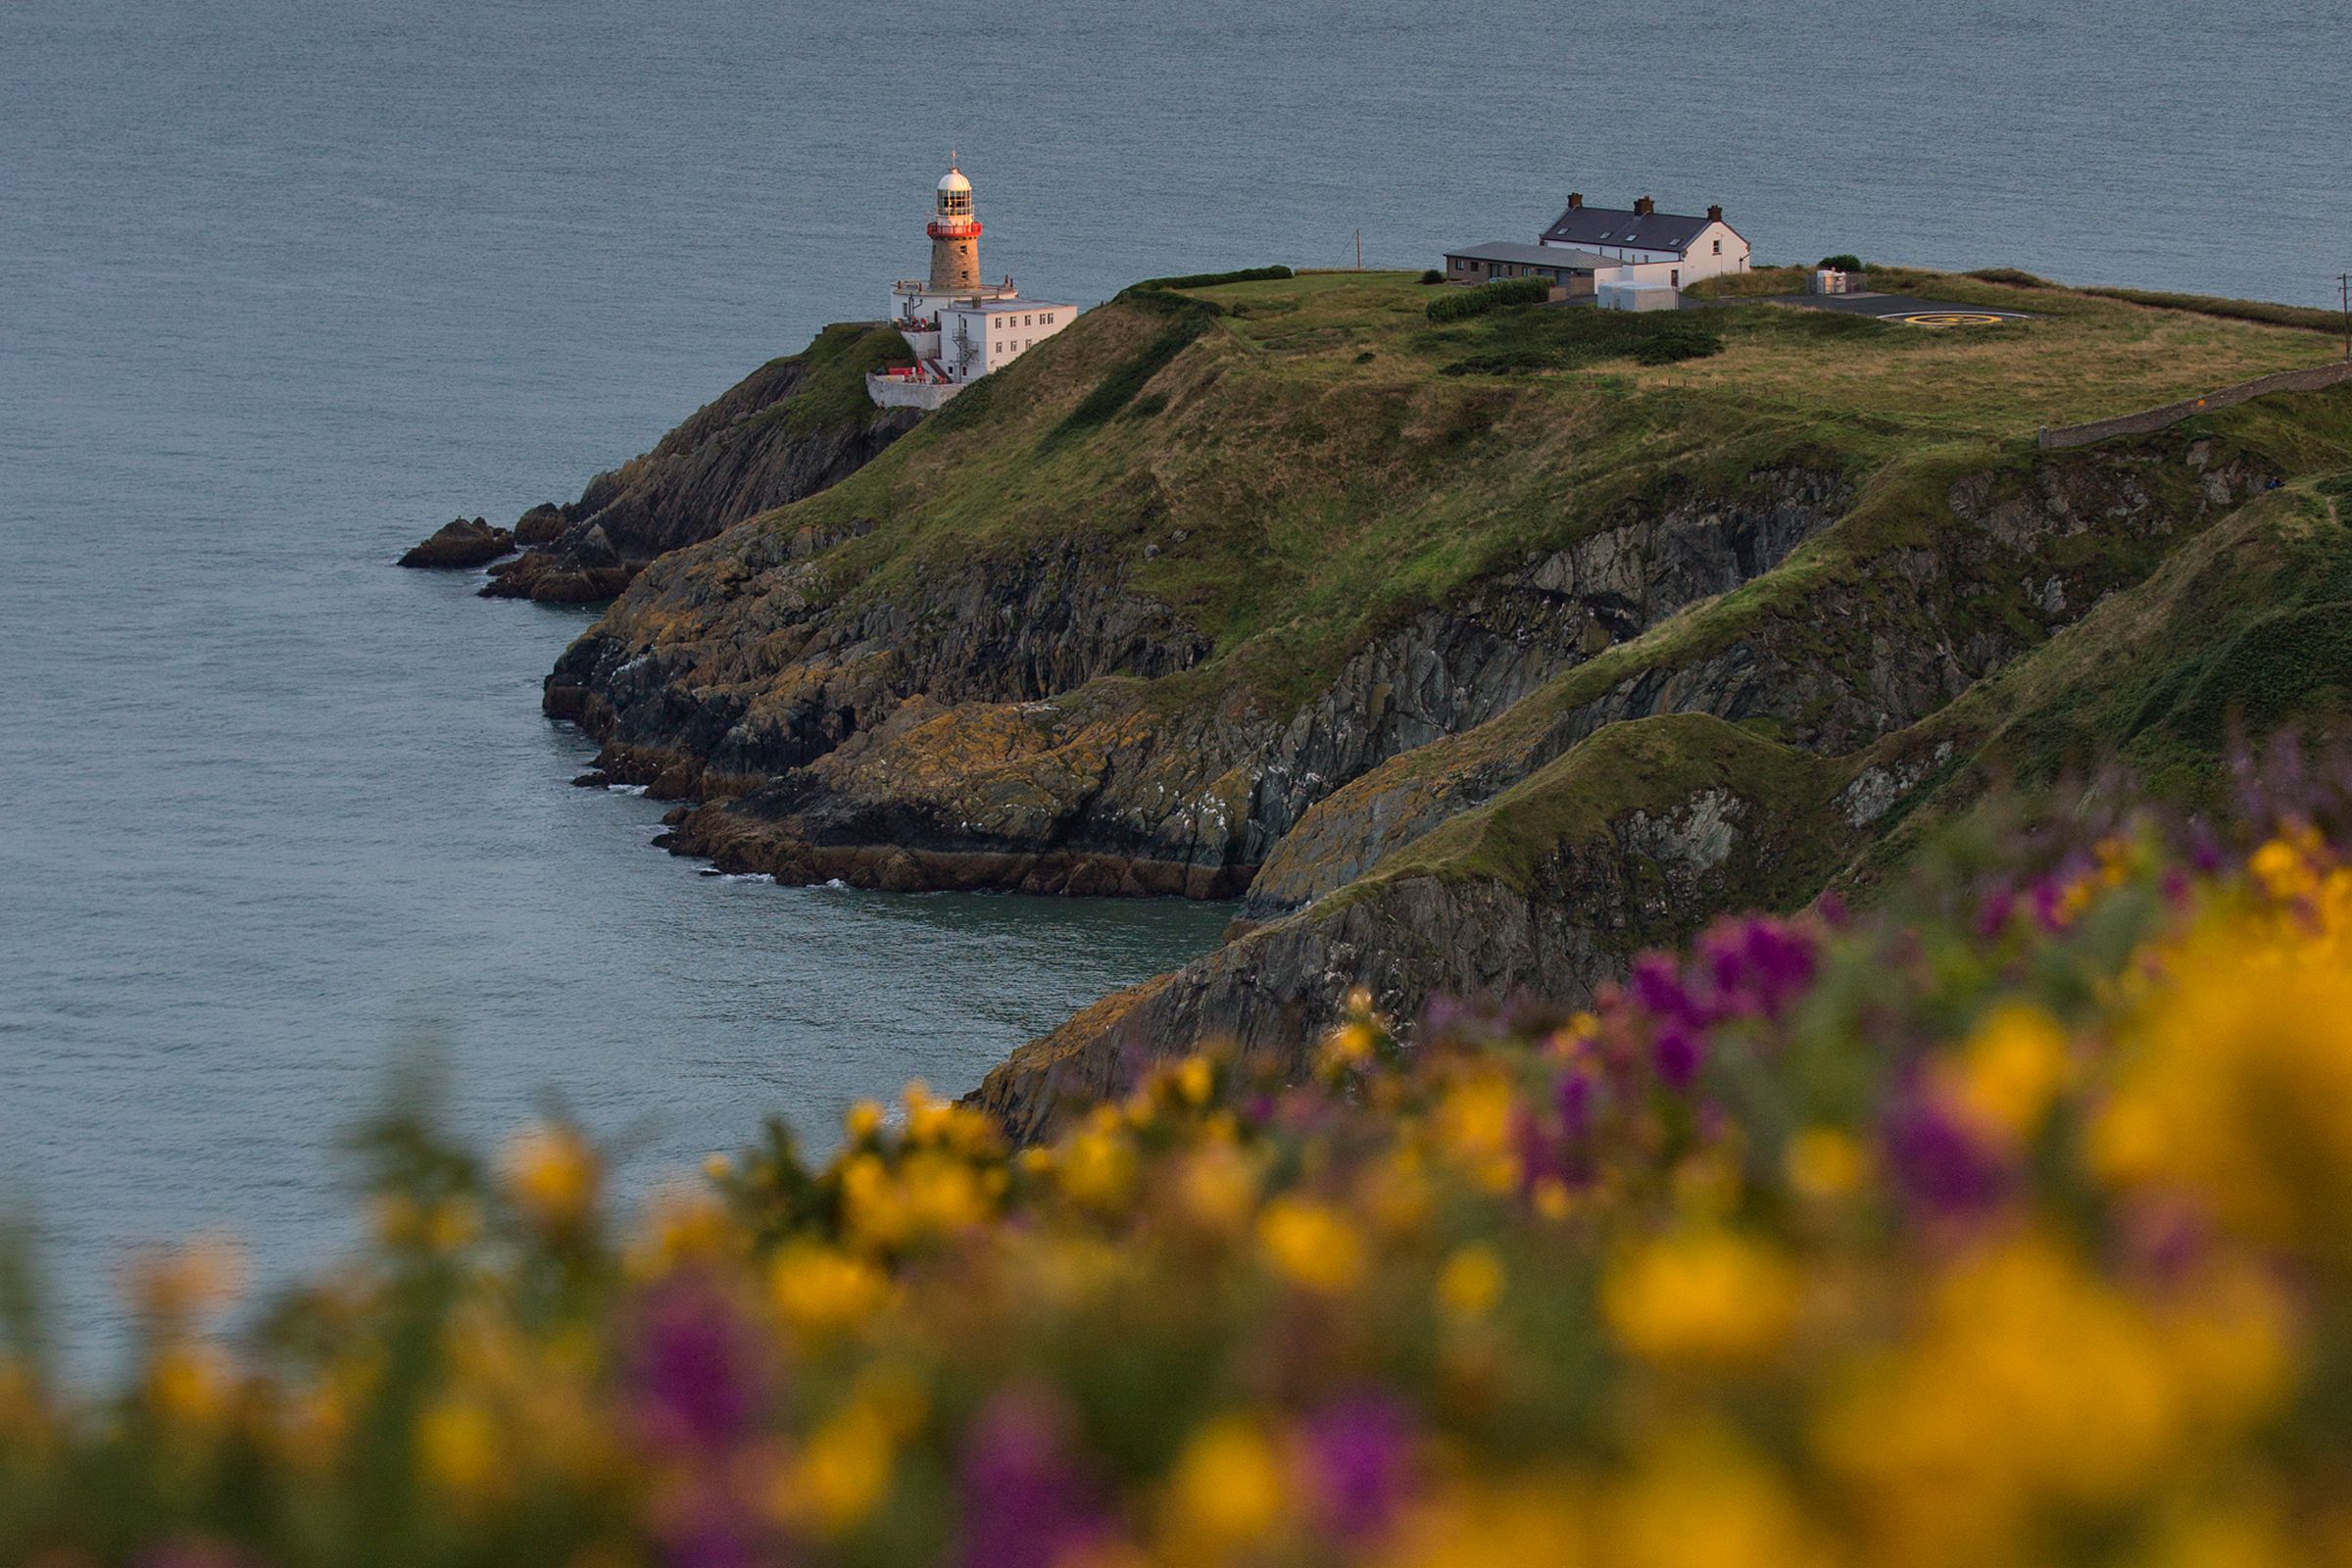 Image of the cliff walk in Howth in County Dublin